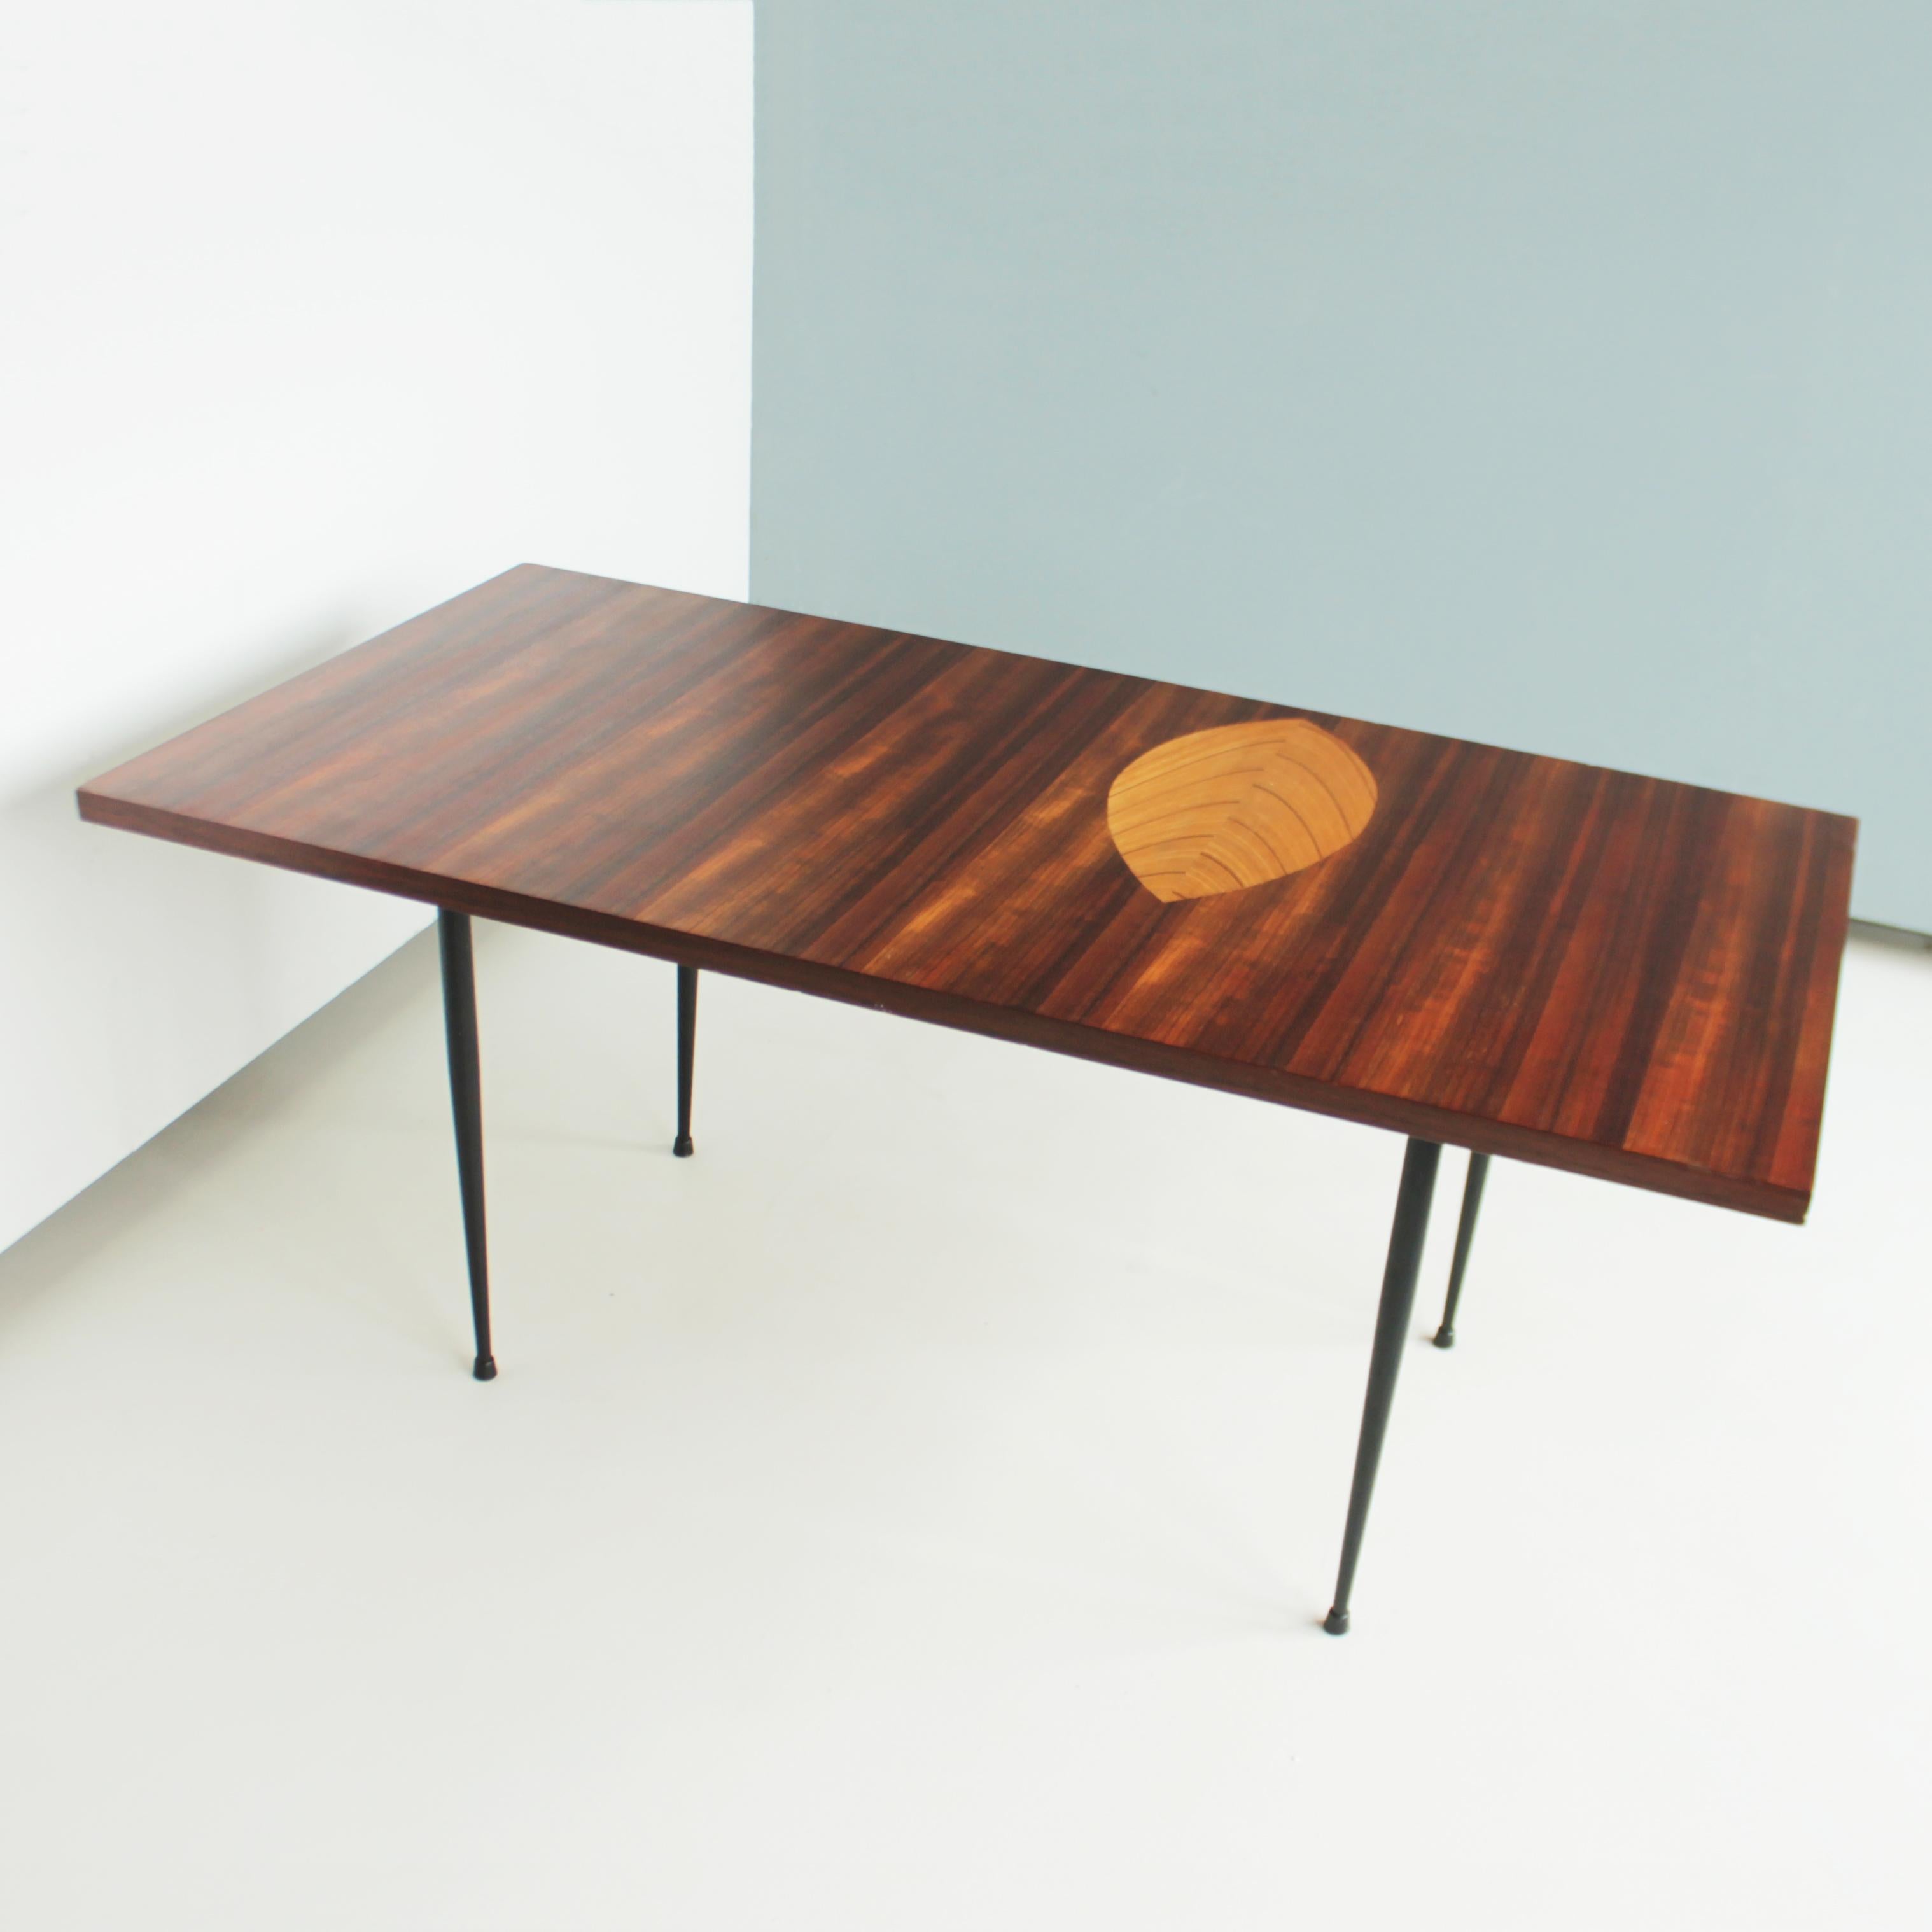 Coffee table by Tapio Wirkkala for Asko Finland, 1958. Model Asko 9013, the laminated birch tree leaf inlaid in the dark padouk. Black lacquered metal legs.
Dimensions: height 20.8 in. (53 cm), length 48.8 in. (124 cm), depth 24.4 in. (62 cm).